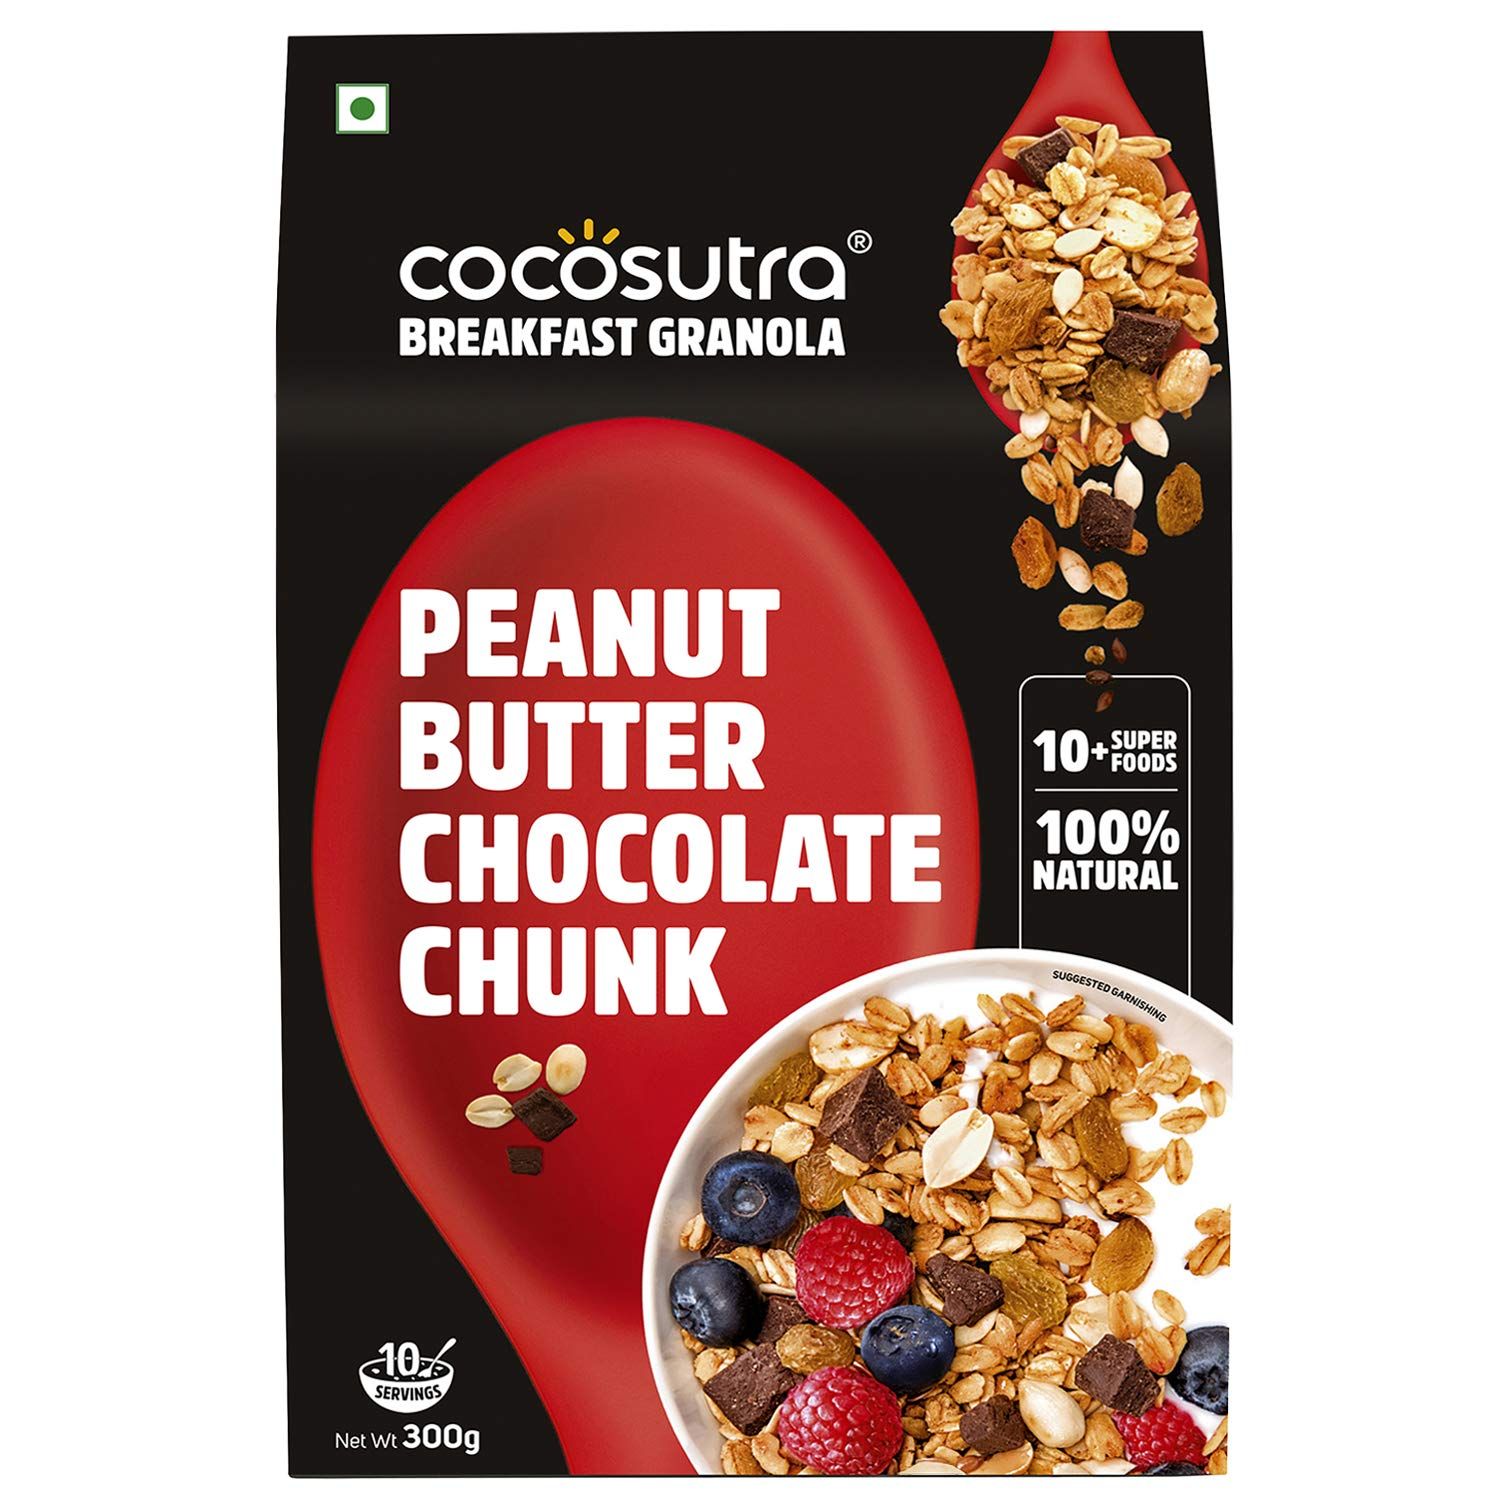 Cocosutra Crunchy Granola Peanut Butter Chocolate Chunk Breakfast Cereal With Oats Nuts Seeds And Dryfruits Sugarfree Image